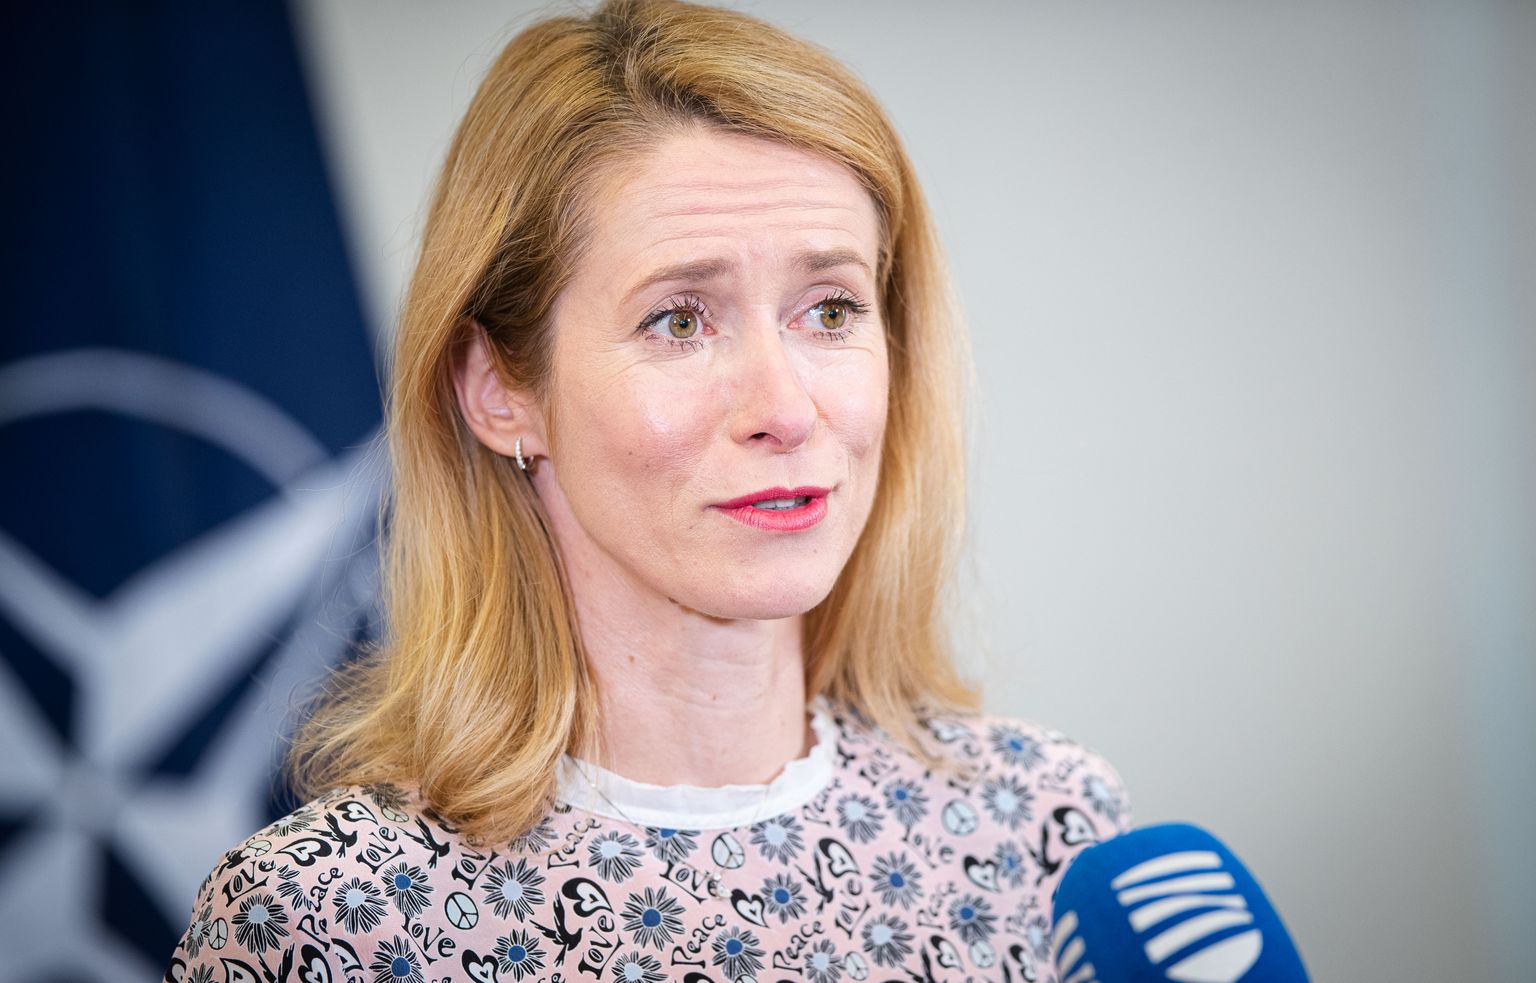 Estonian Prime Minister Kaja Kallas, leader of the Reform Party, announced on Friday afternoon that she has made a proposal to the president to dismiss Center Party ministers.